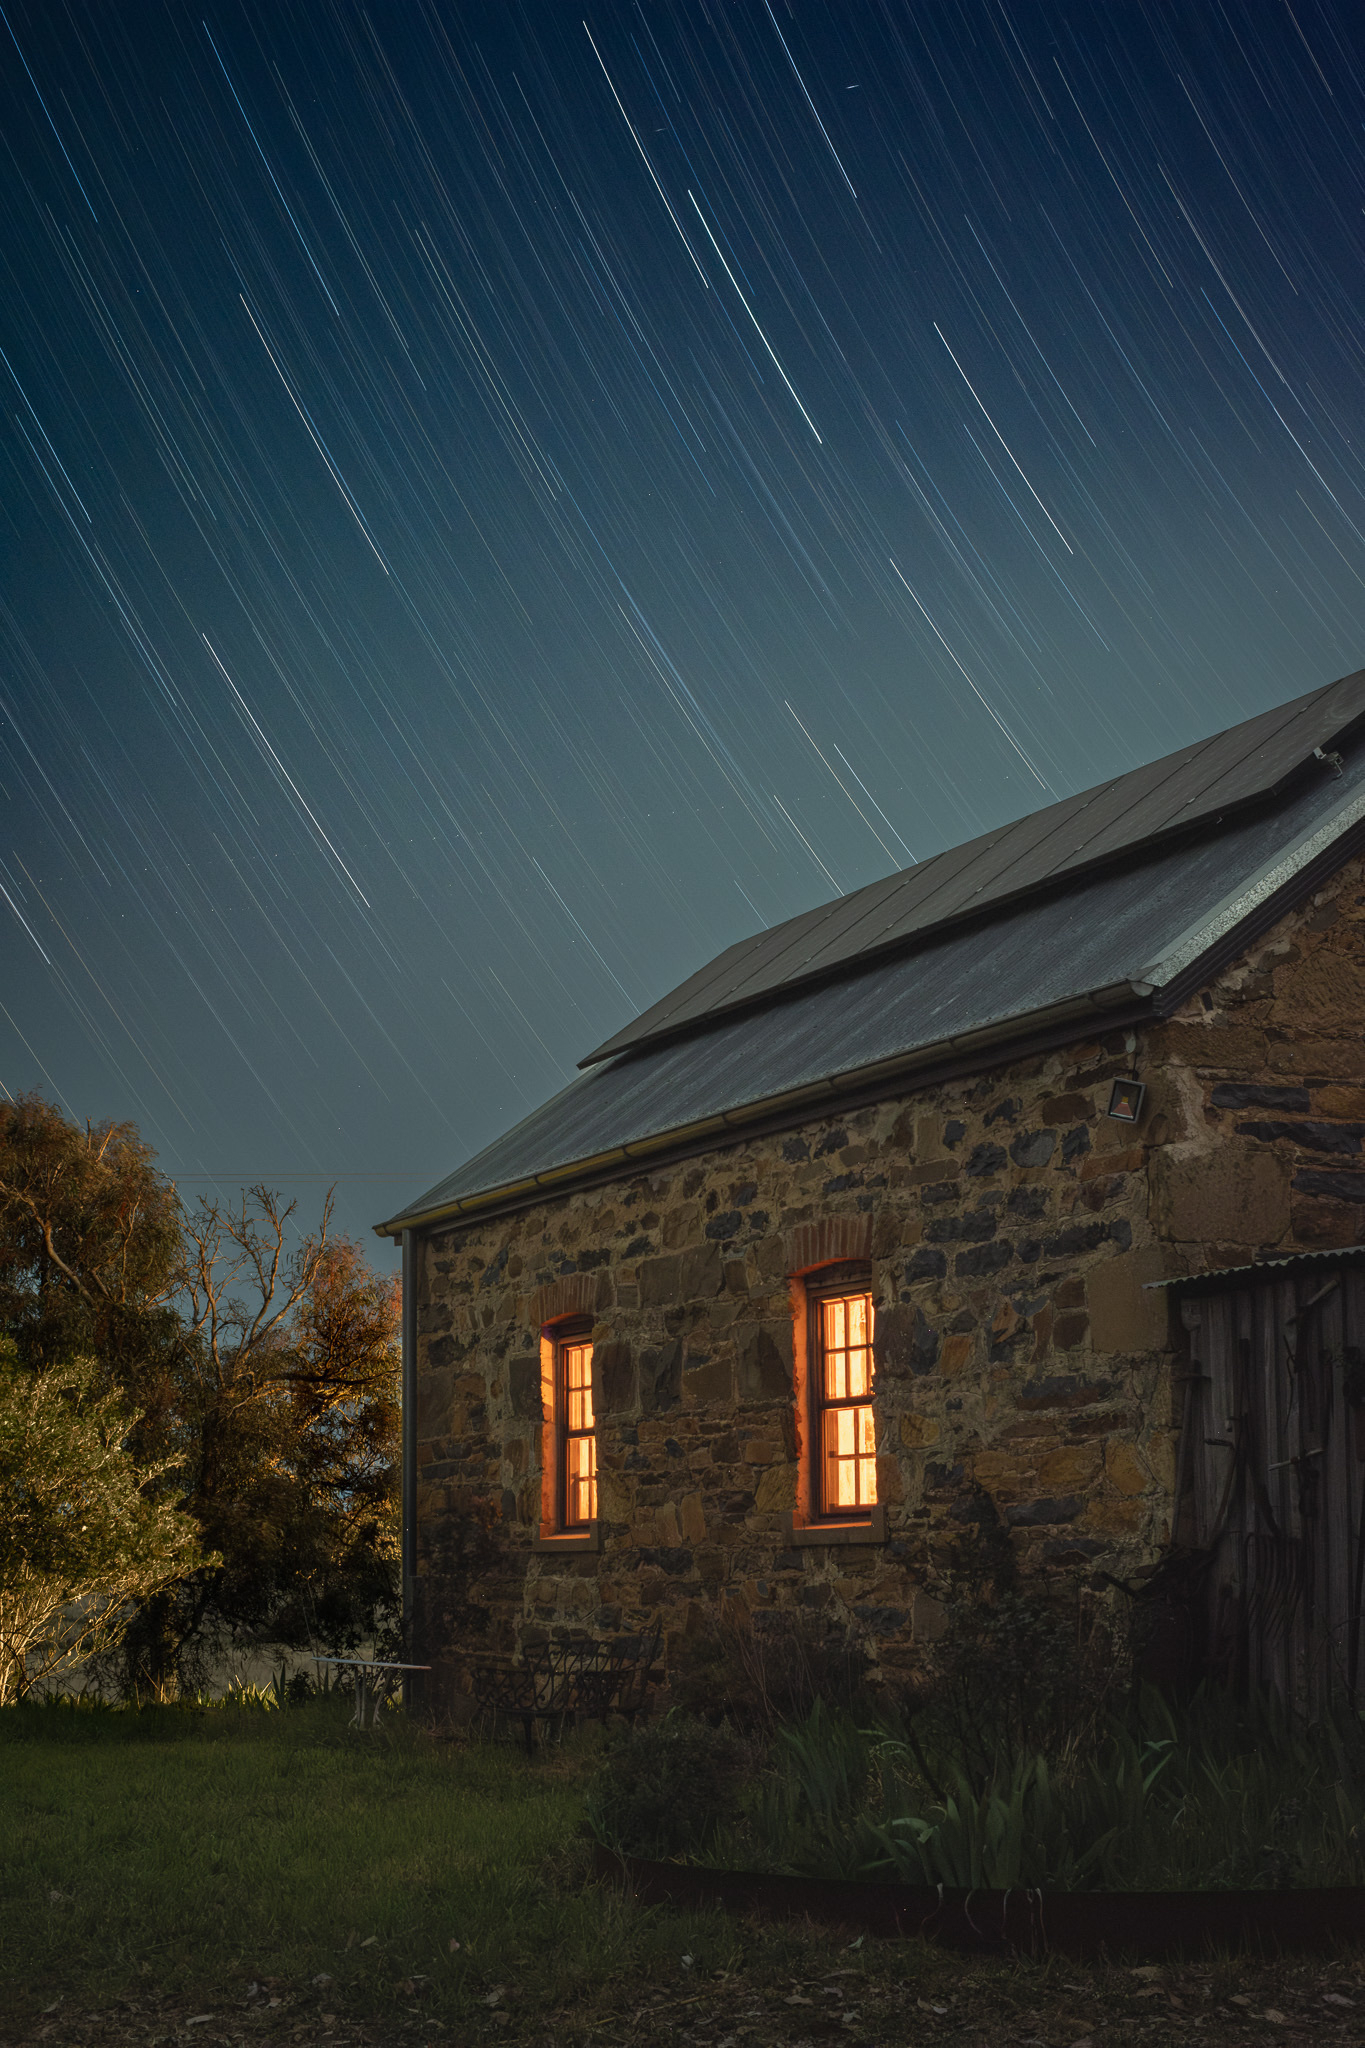 A single image star trail captured over a historic building near Gundaroo in Canberra’s north.